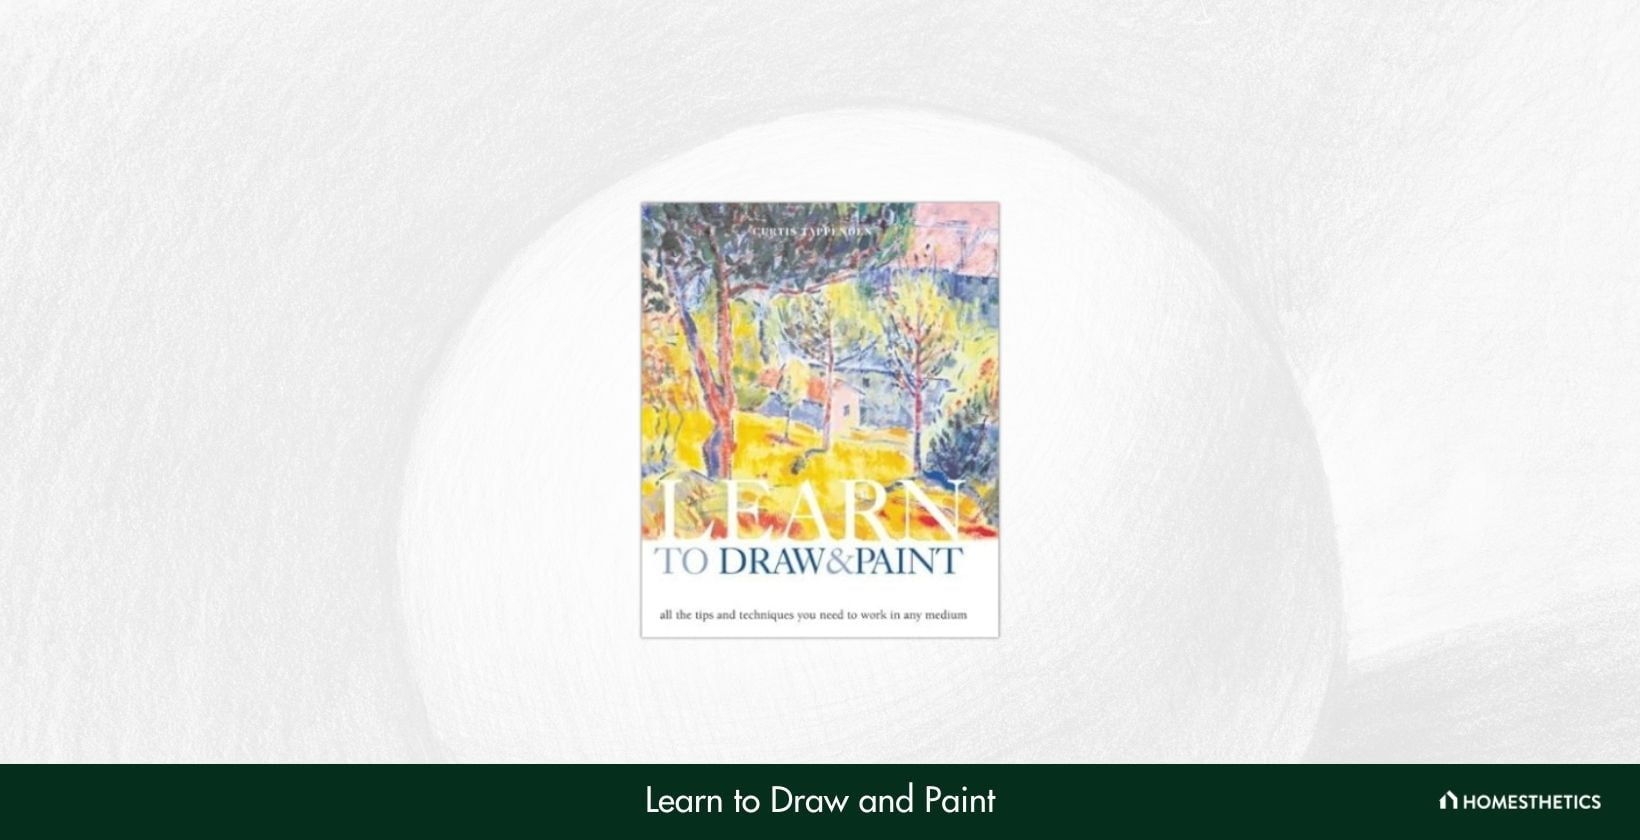 Learn to Draw and Paint by Curtis Tappenden